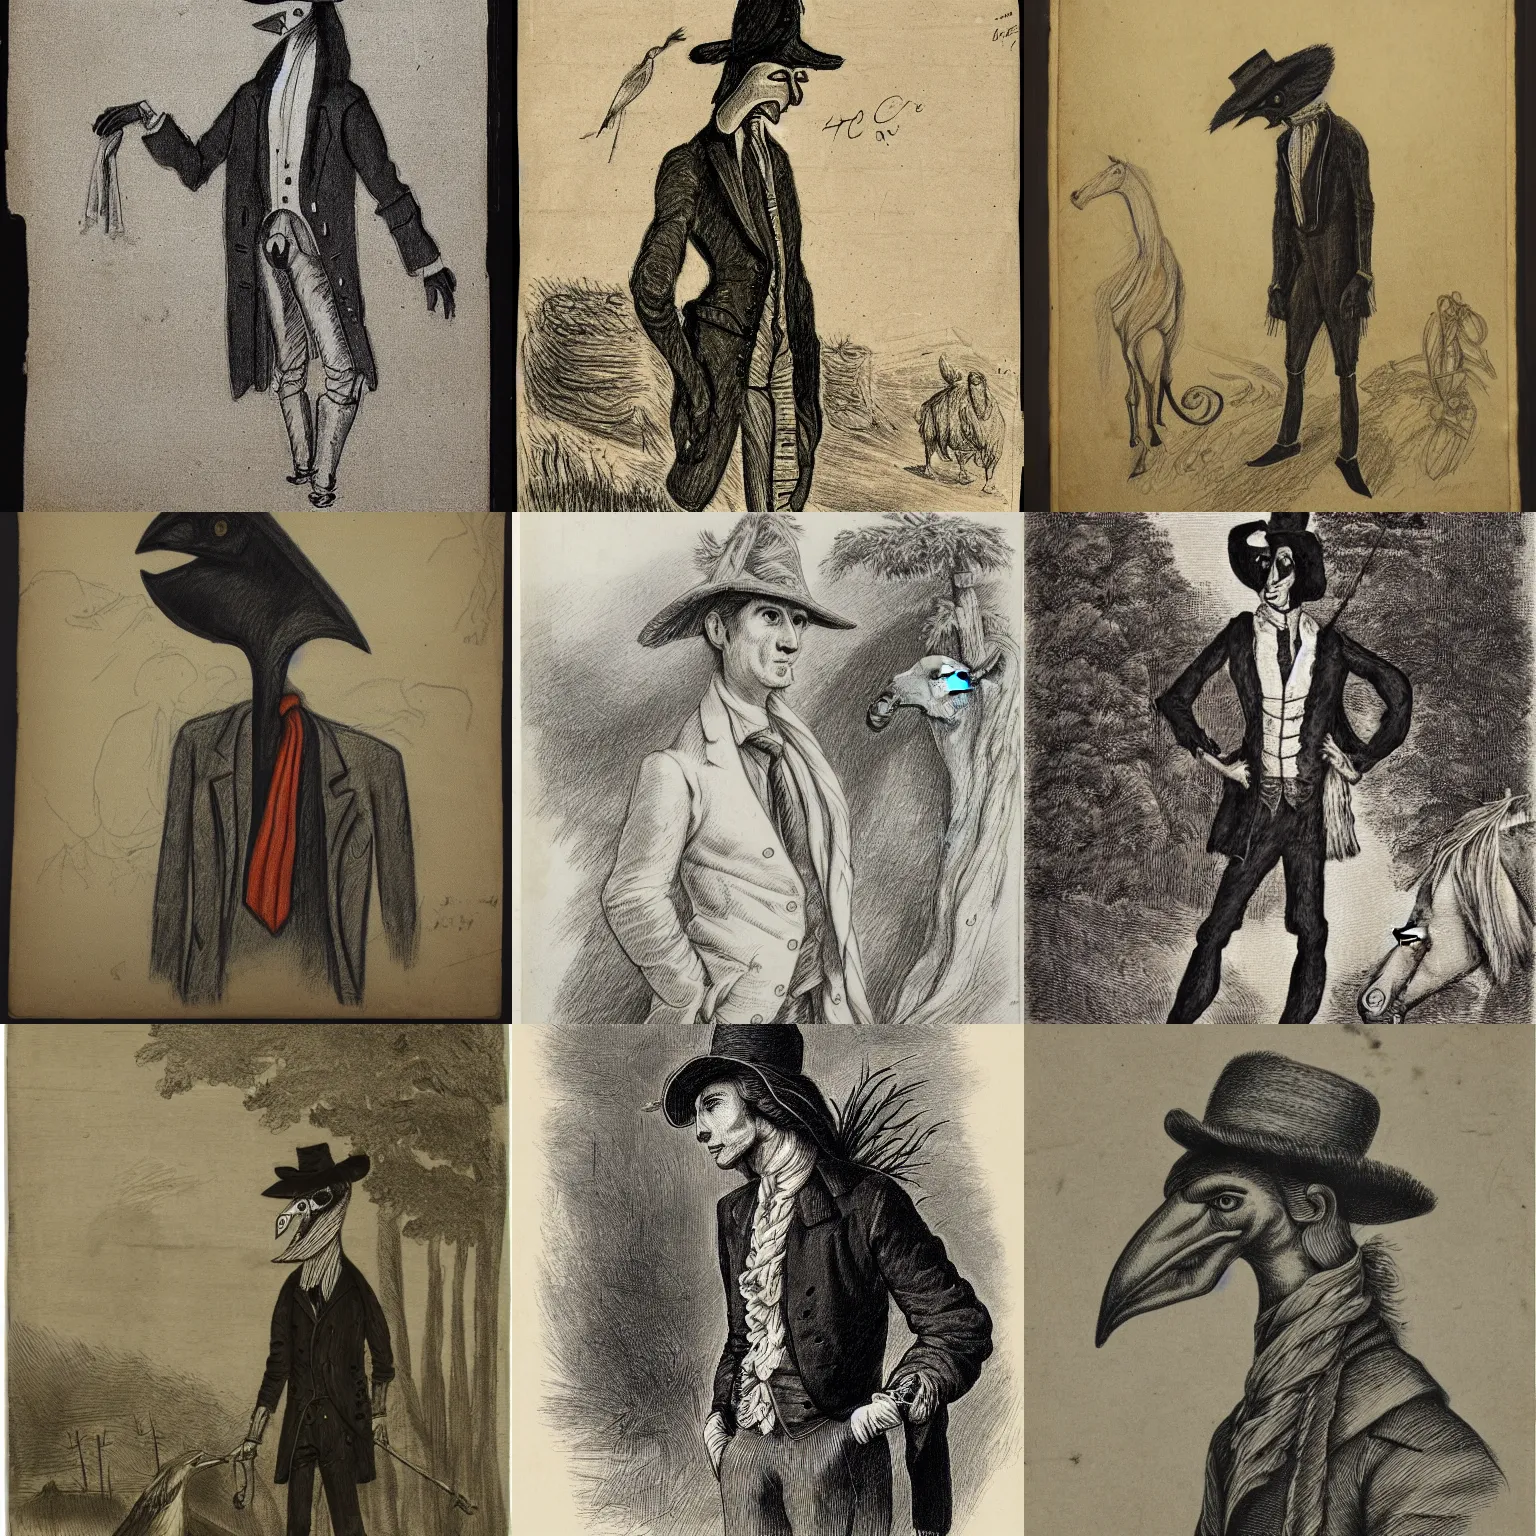 Prompt: crow - like humanoid with long neck and equine face, forest of neckties, straw hat and overcoat, bucolic, rococo, sketch